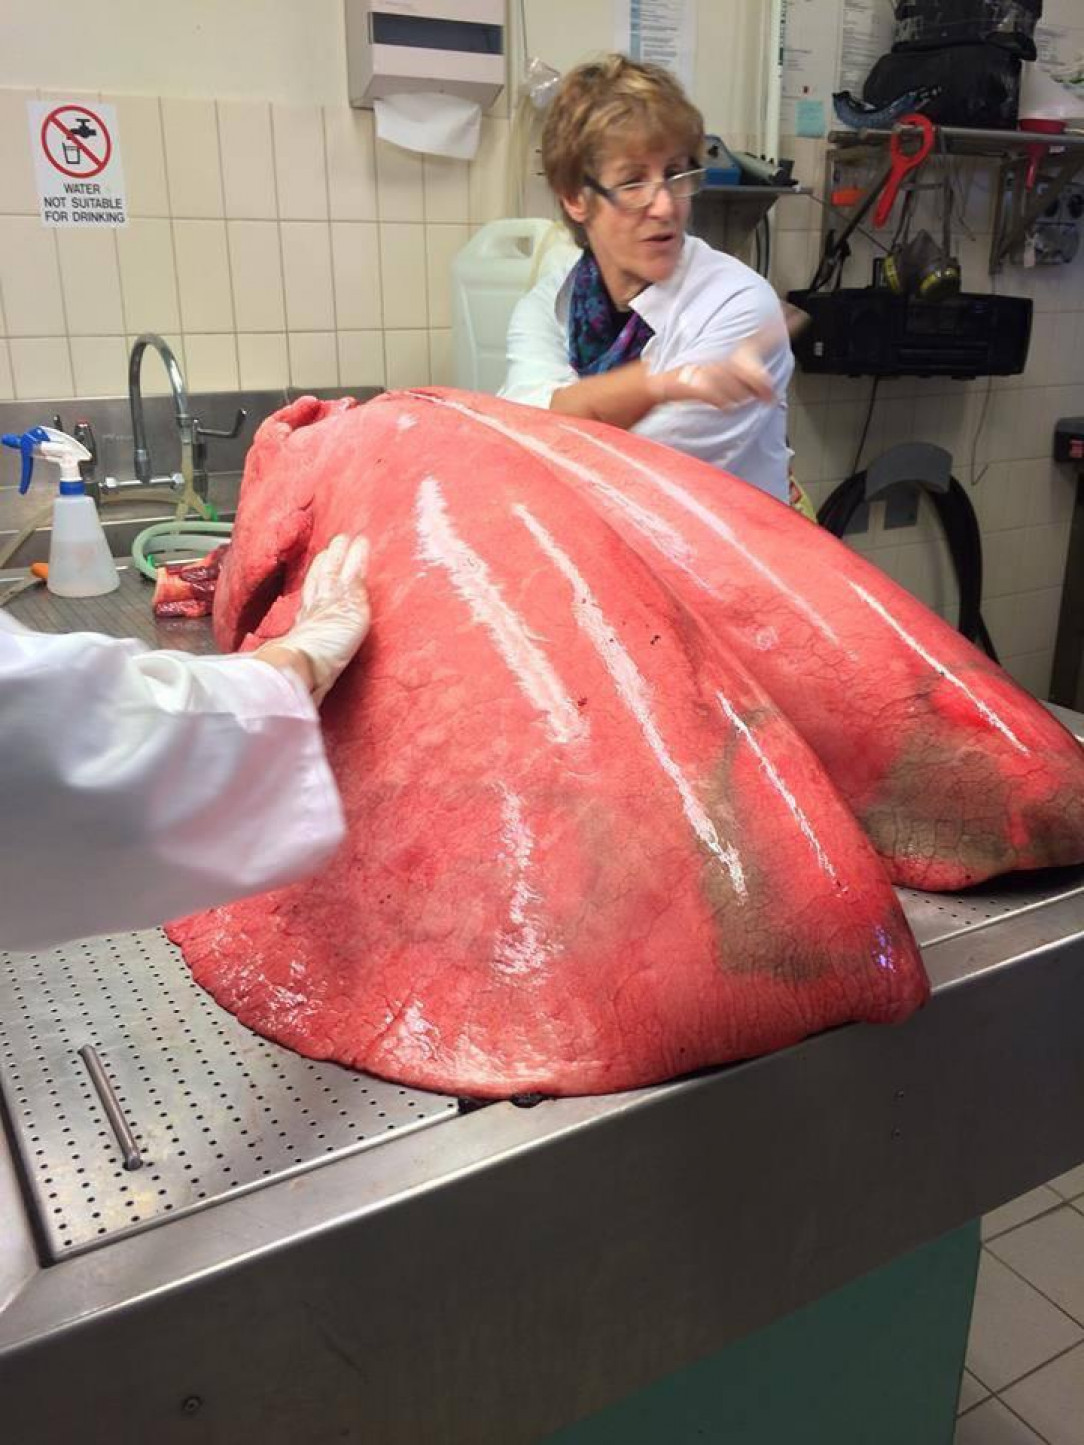 The sheer size of these fully-inflated horse lungs 🐴